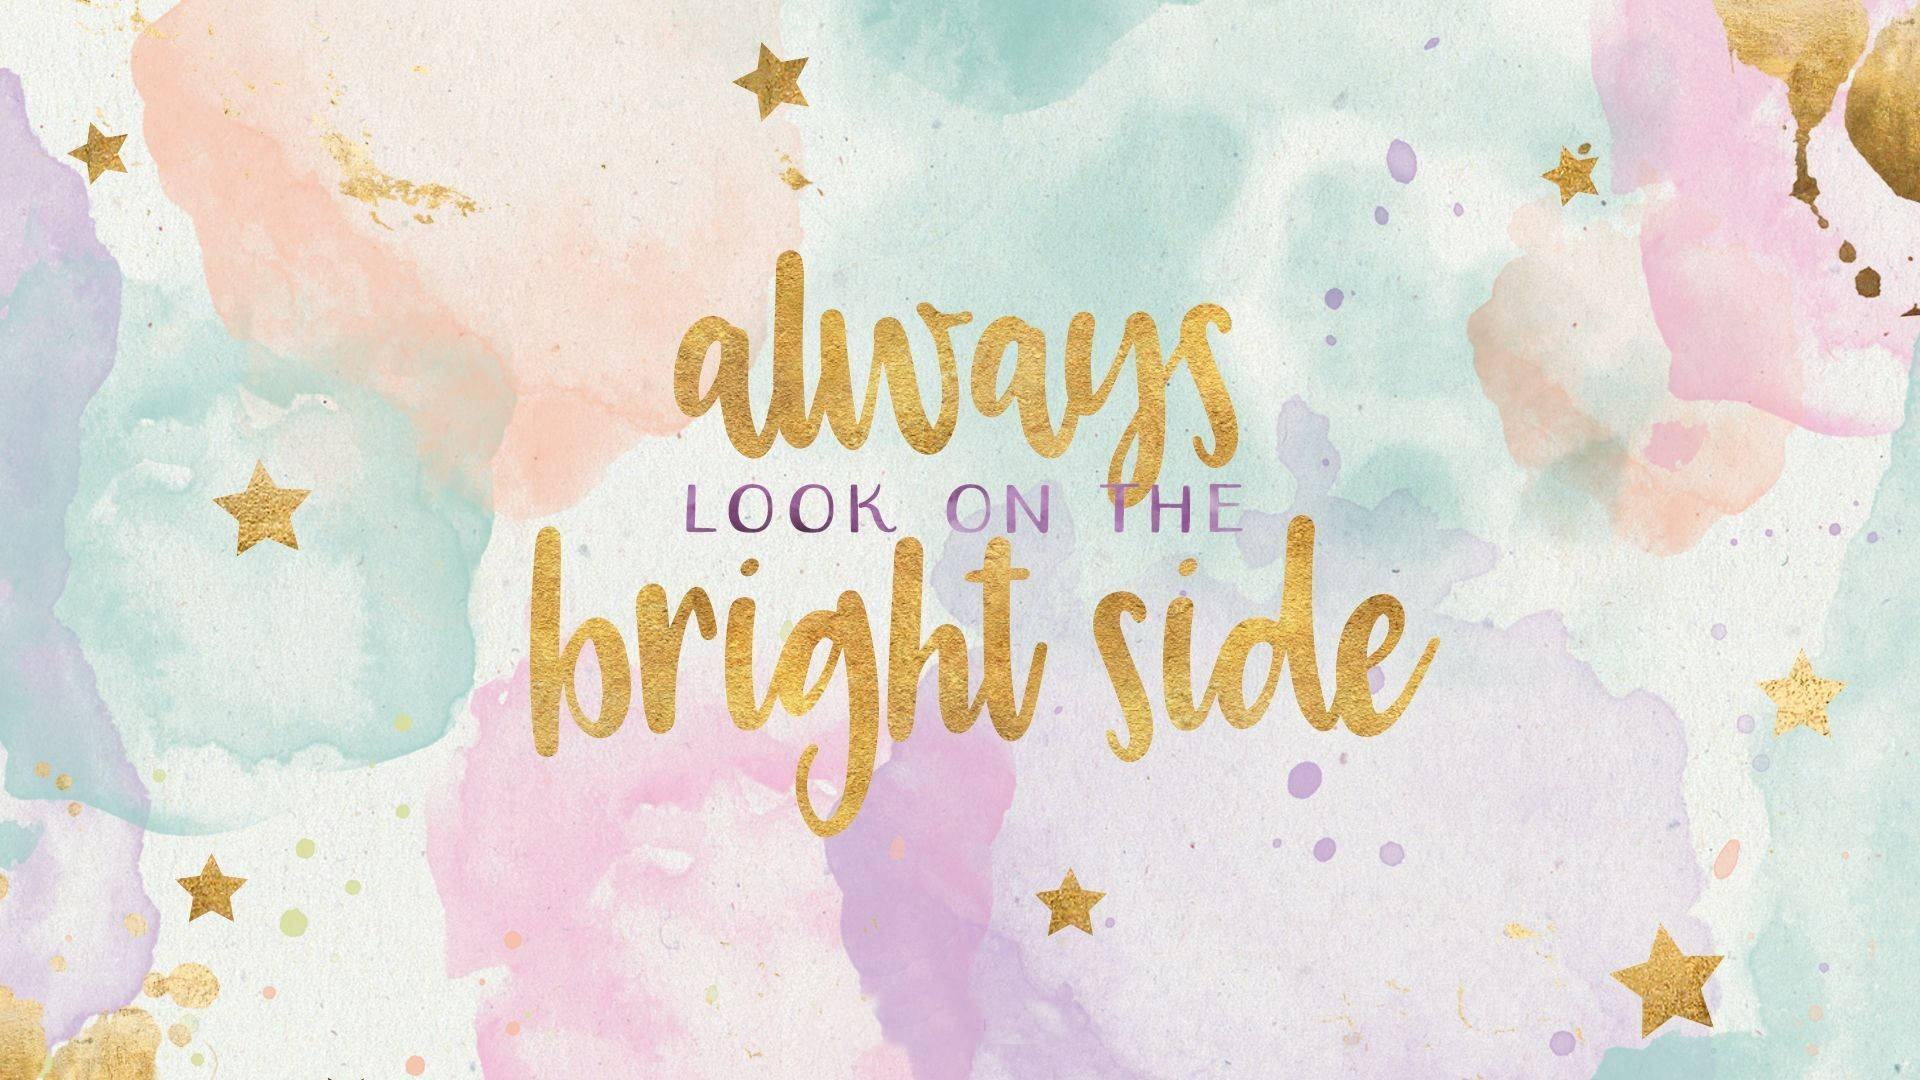 Download Bright Side Quotes Laptop Wallpaper 